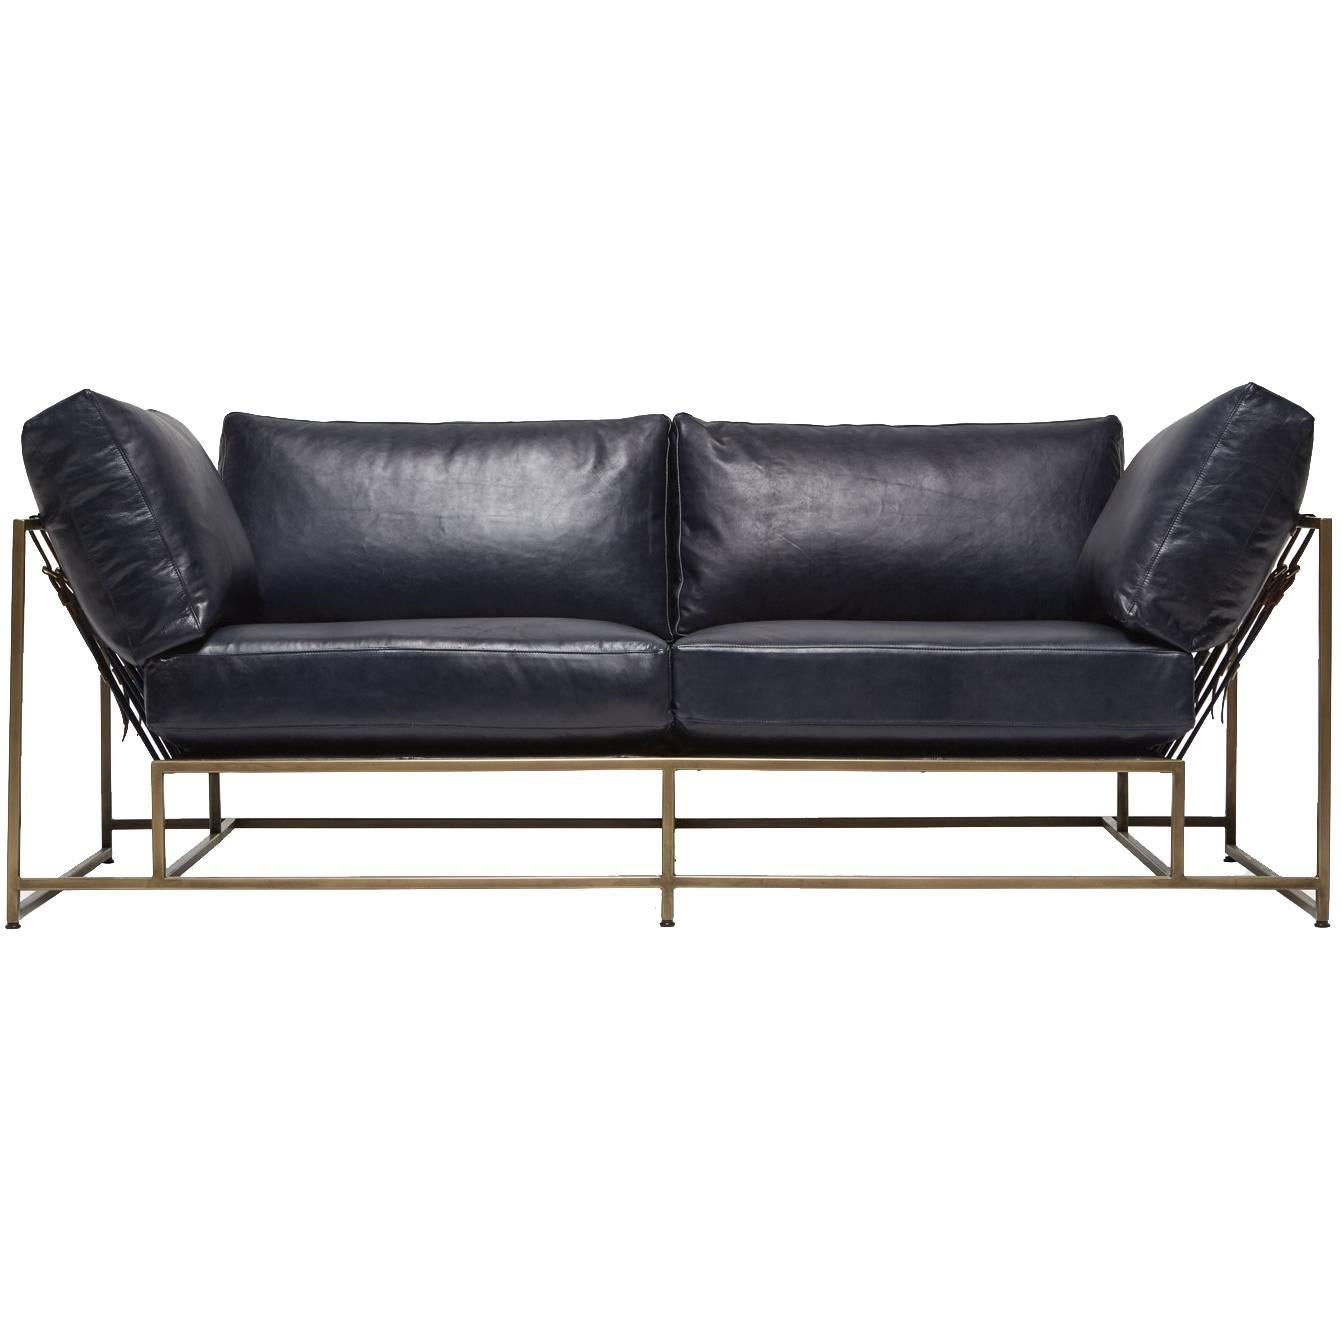 Indigo Leather and Antique Brass Two Seat Sofa For Sale